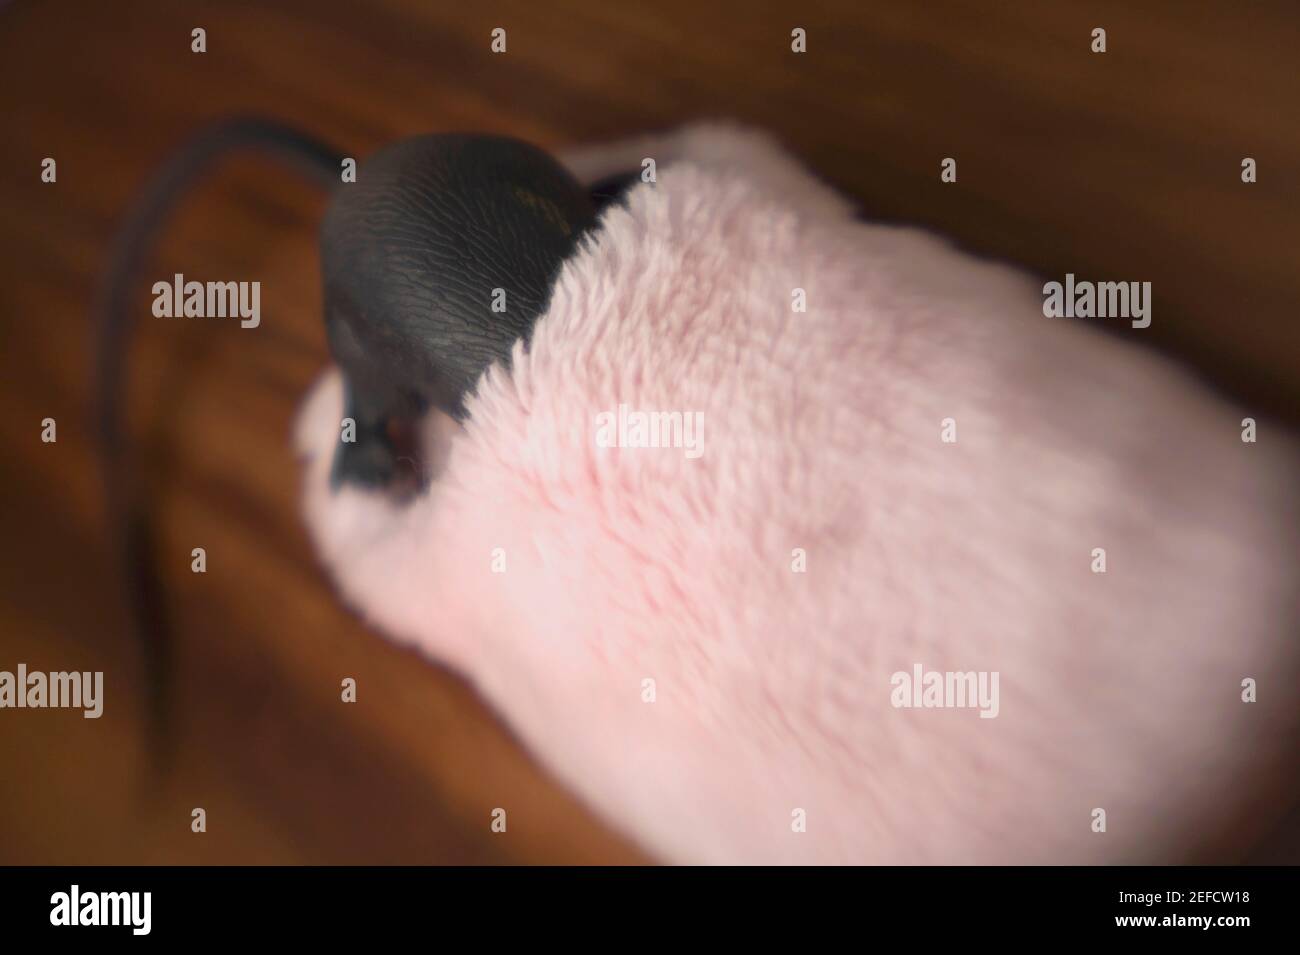 High angle view of a rat in baby booties Stock Photo